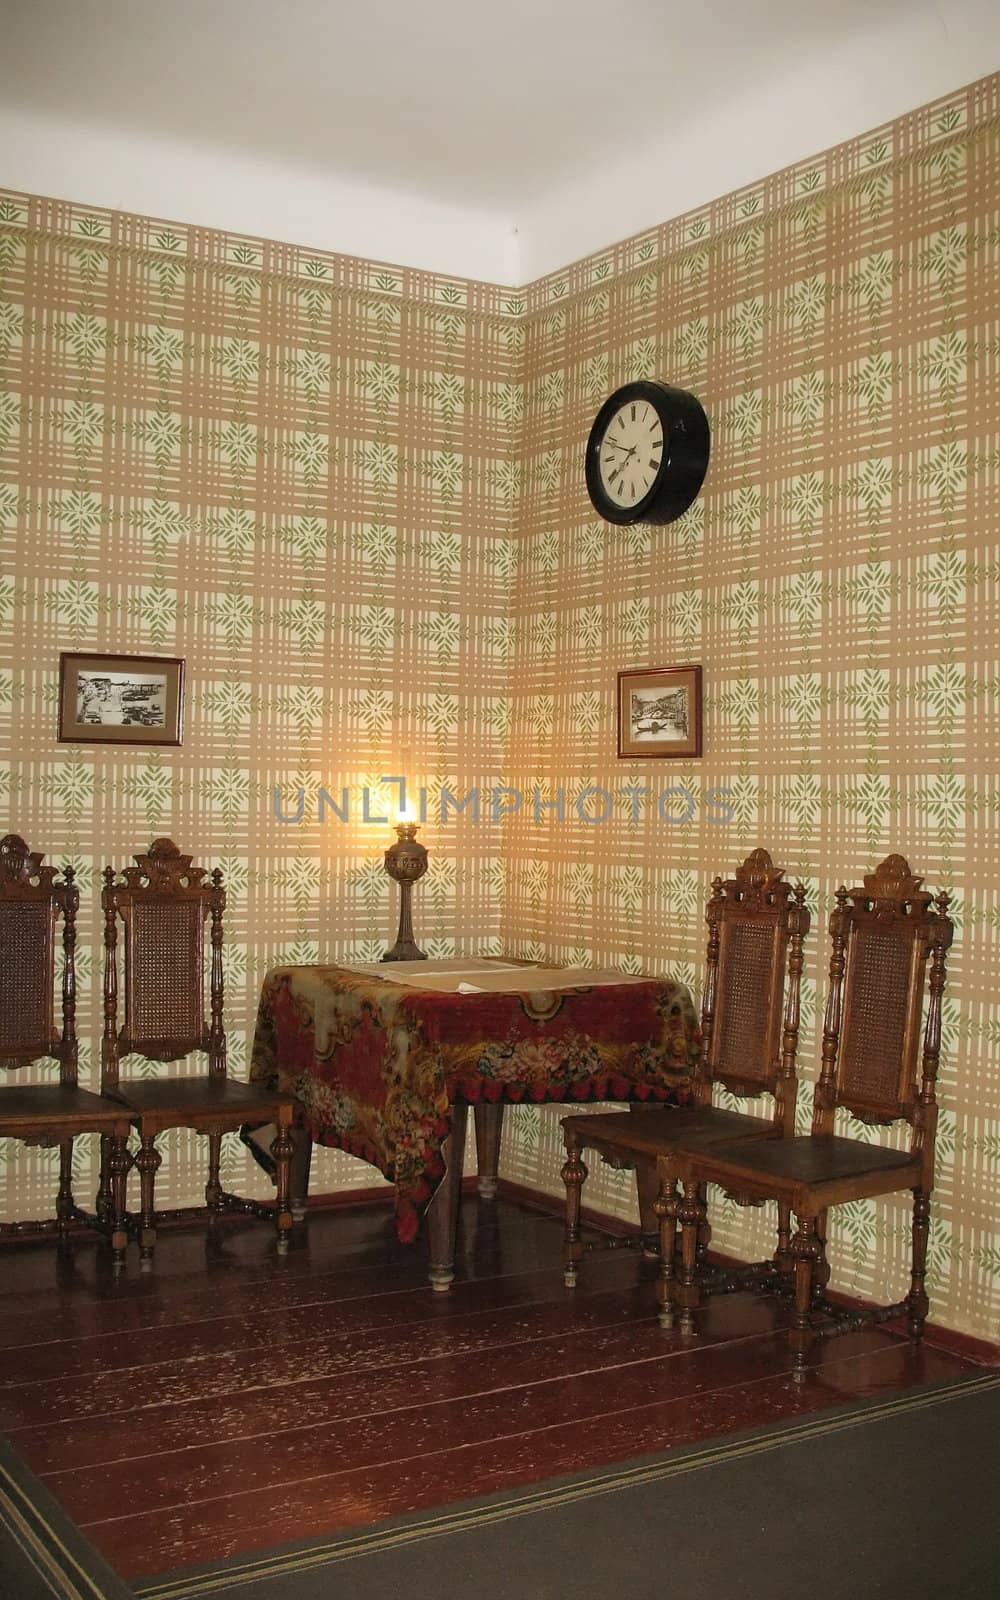 Dining room interior in an historic home